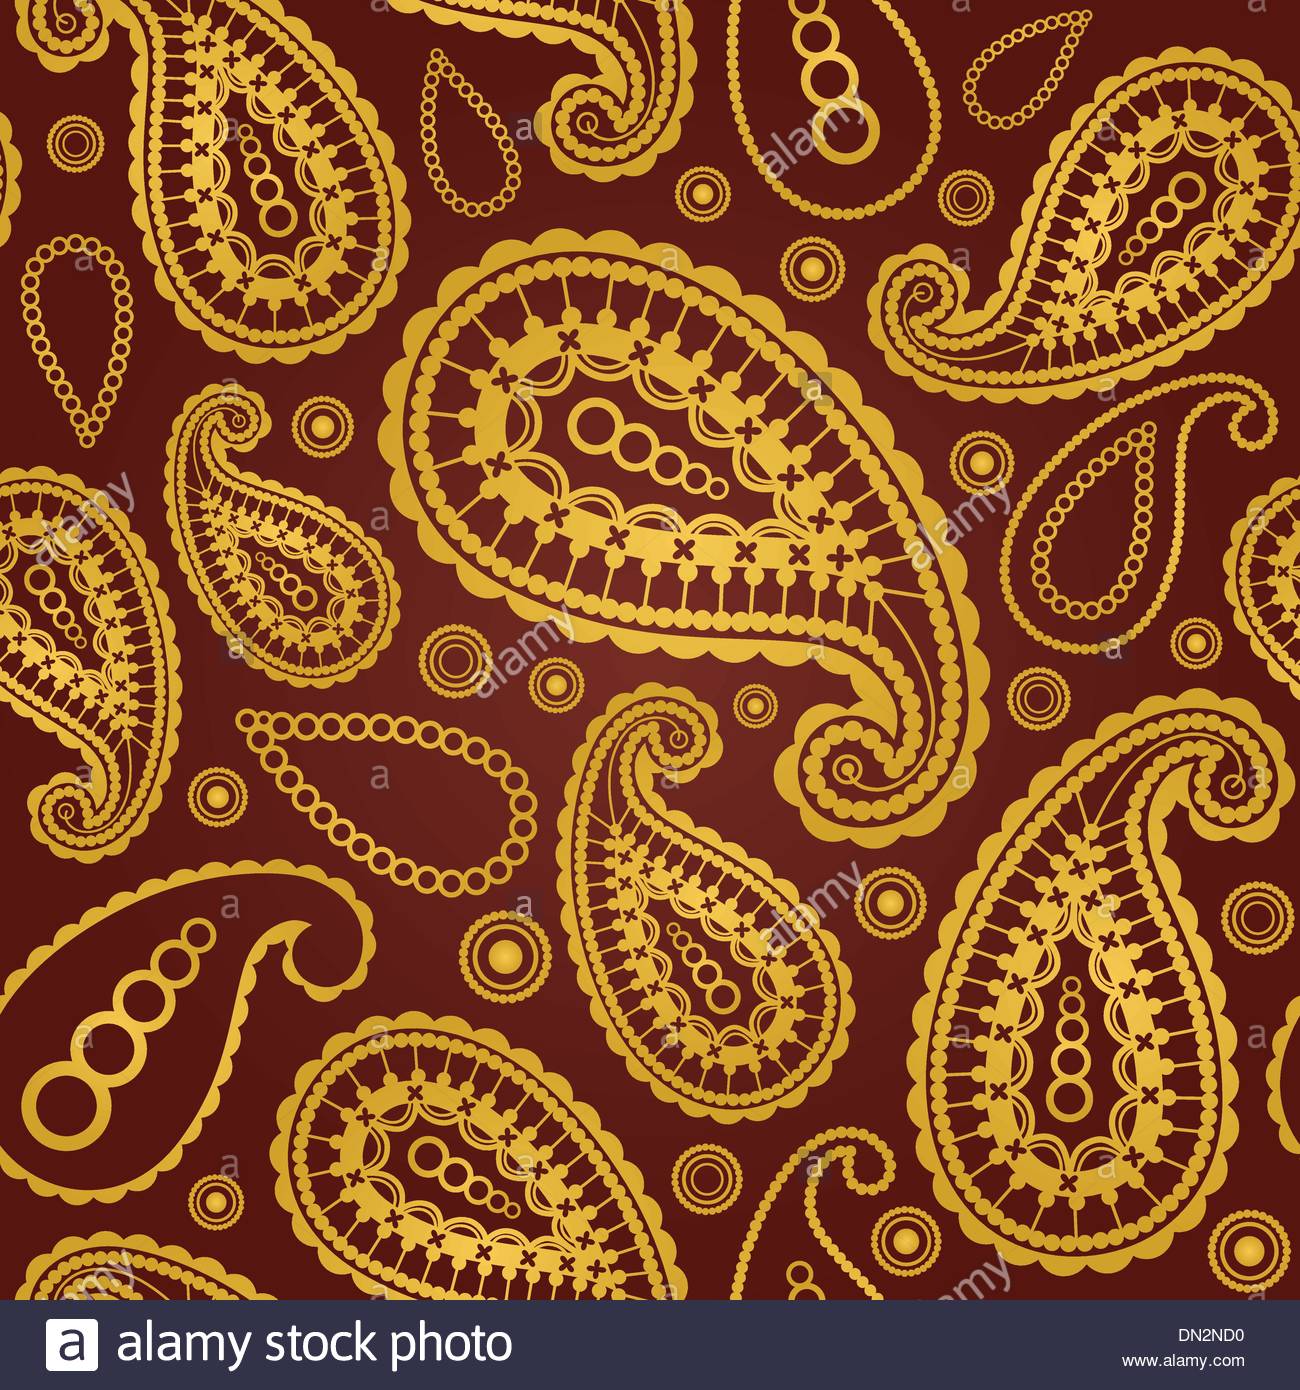 Seamless Gold And Brown Paisley Wallpaper Pattern Stock Vector Art